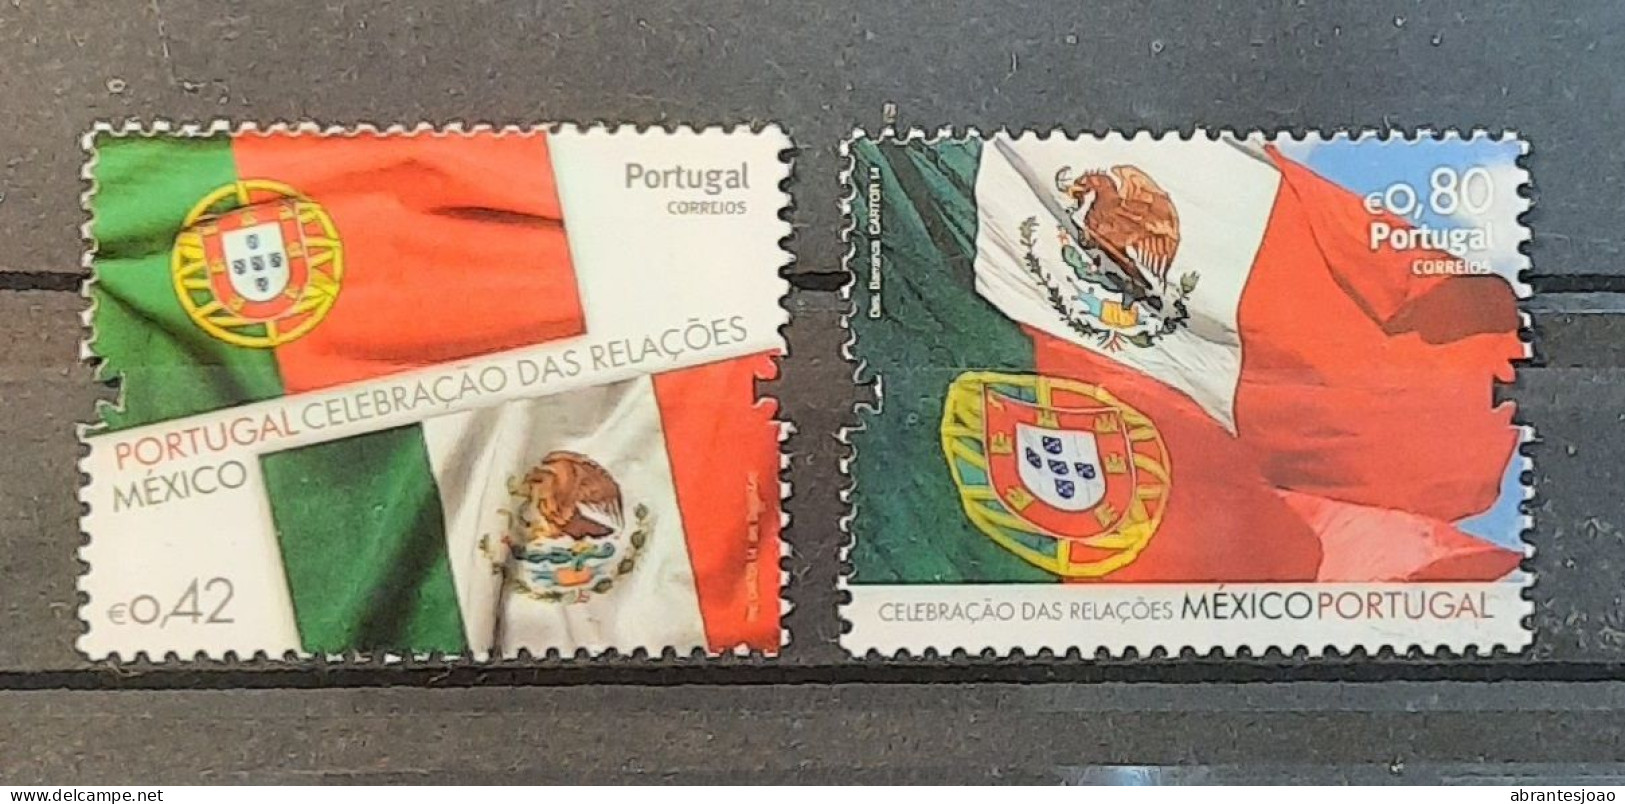 2014 - Portugal - Celebrating Relationship With Mexico - MNH - 2 Stamps - Unused Stamps